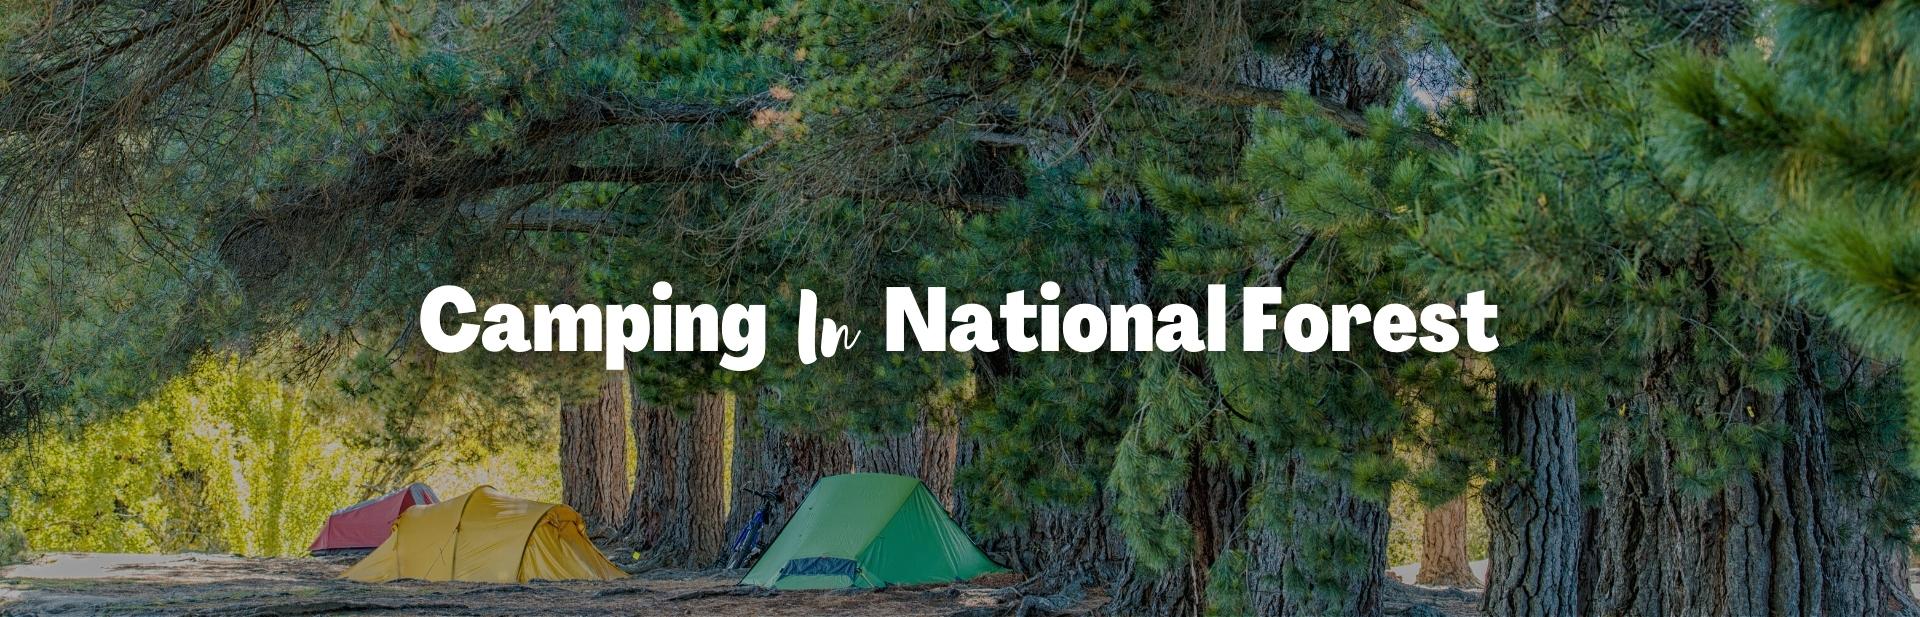 Camping in National Forests: Your Ultimate Guide